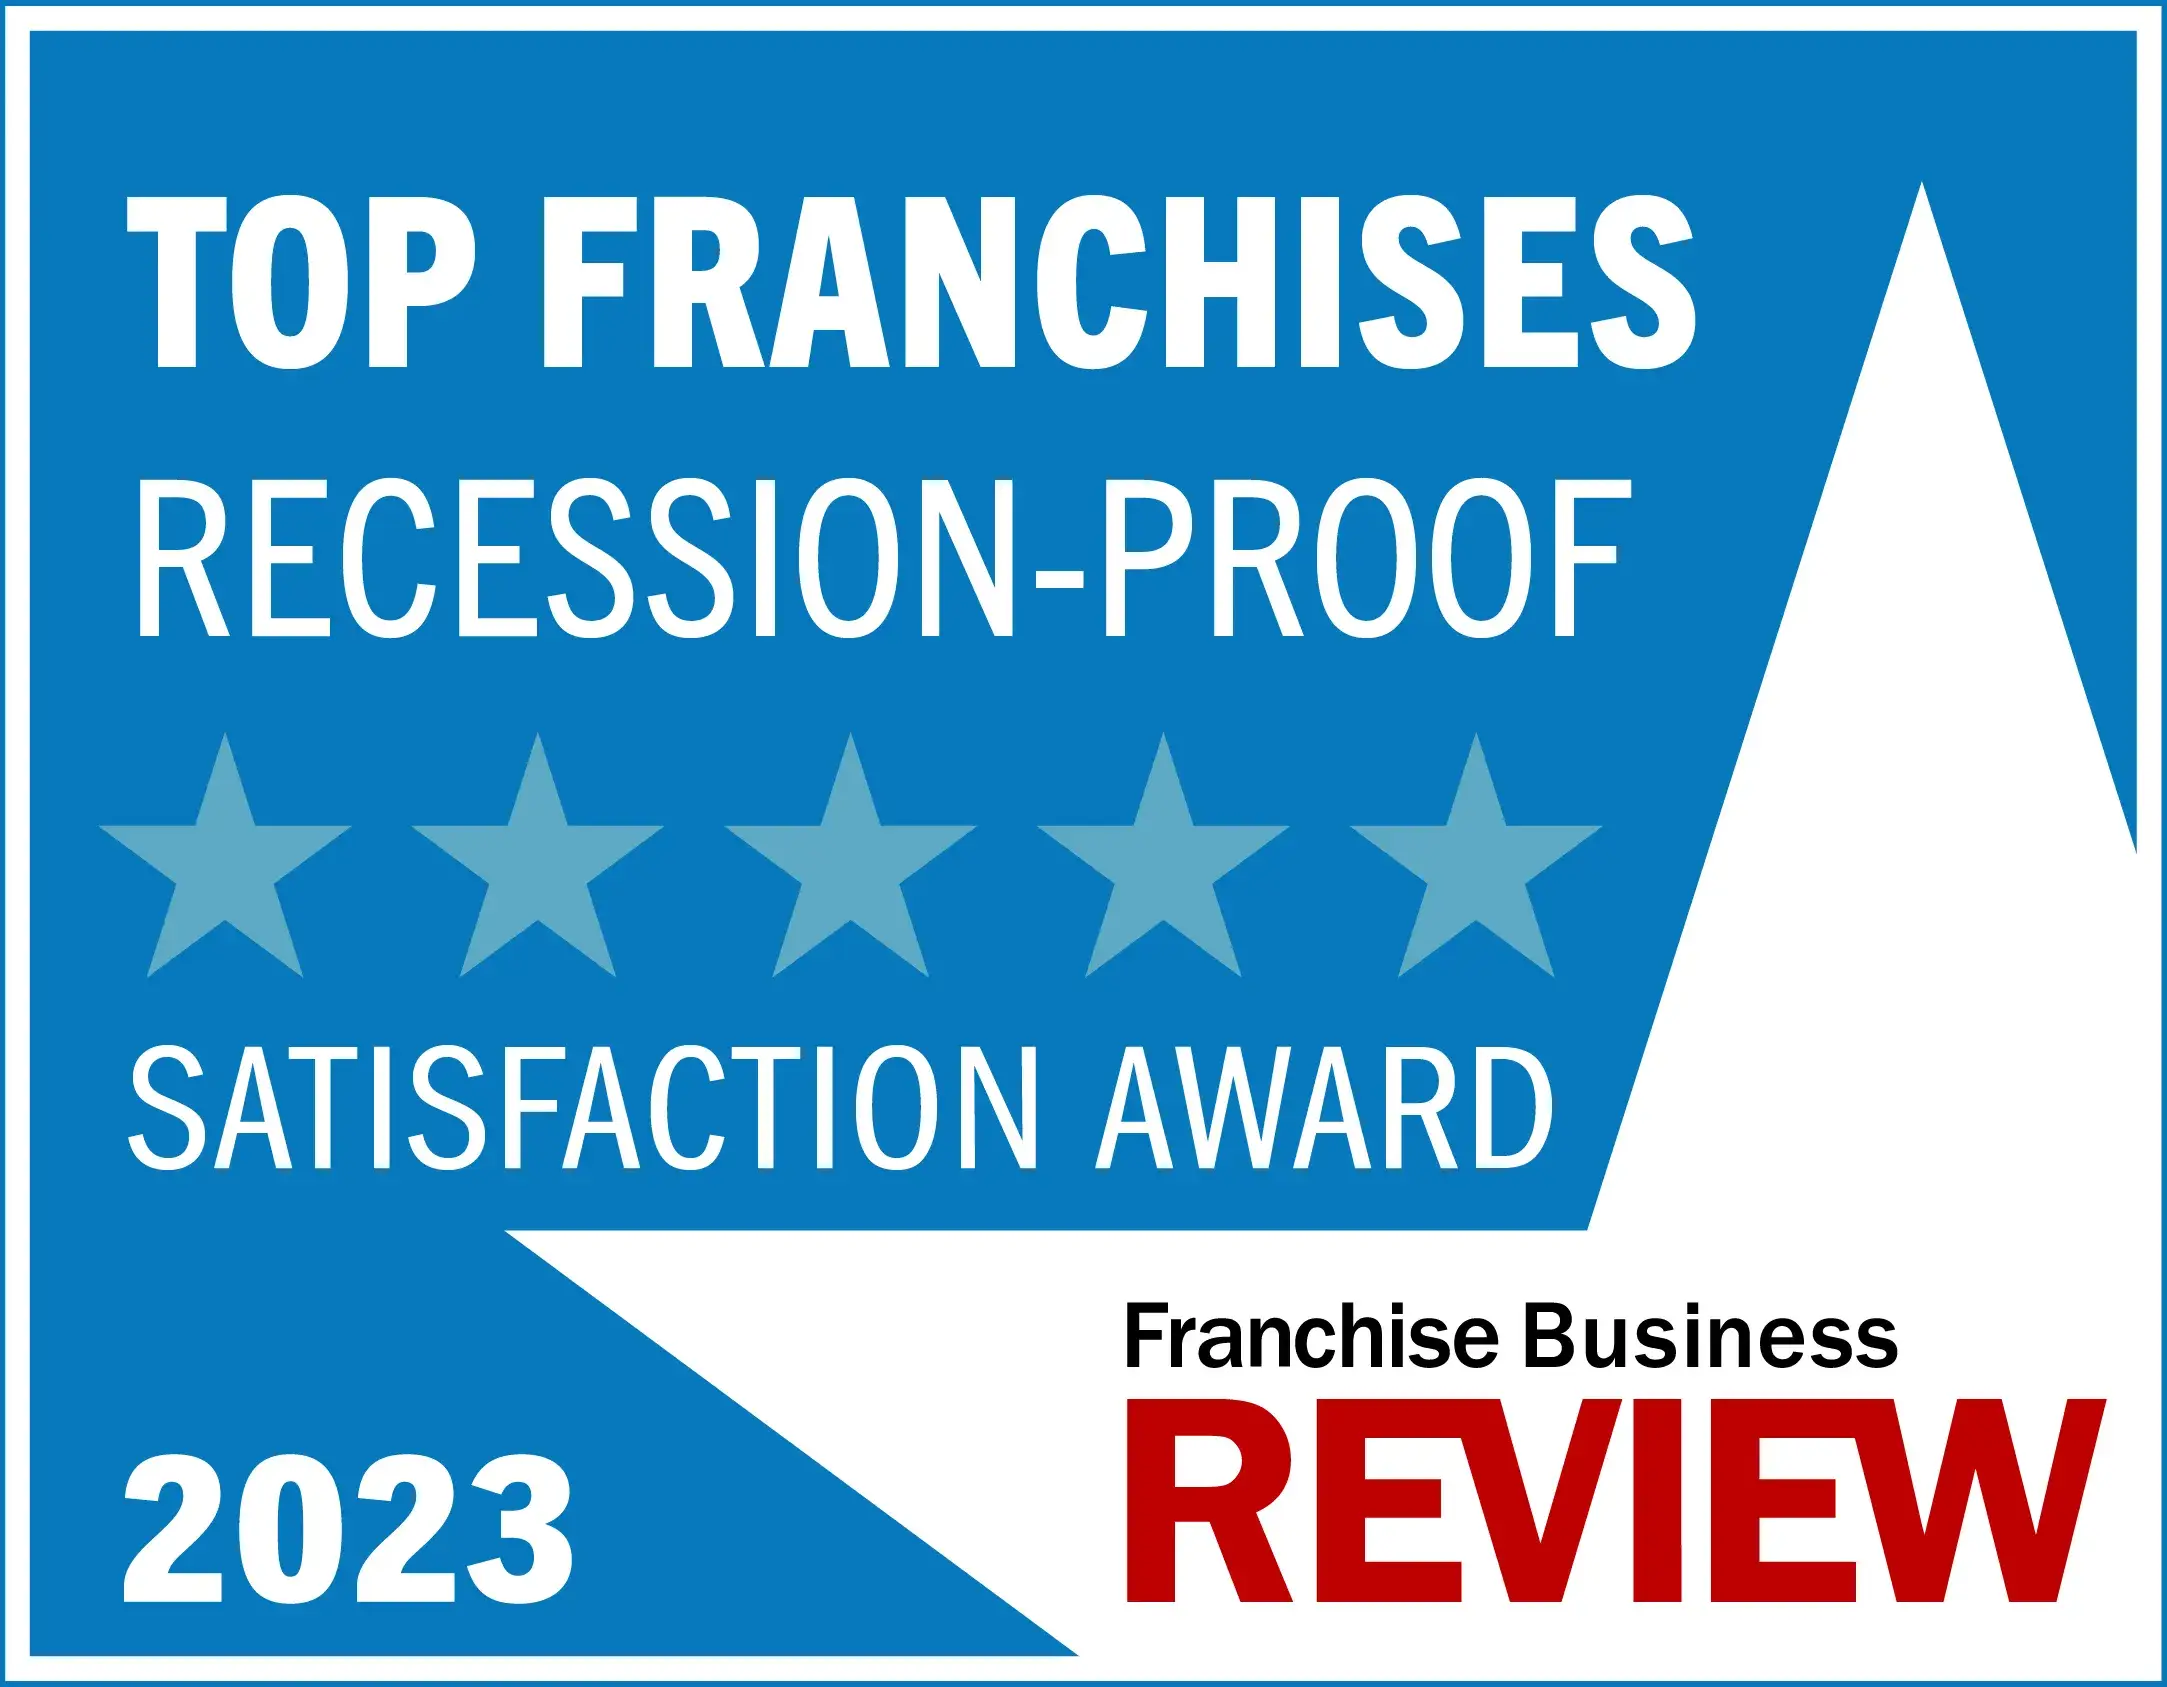 Franchise Business Review